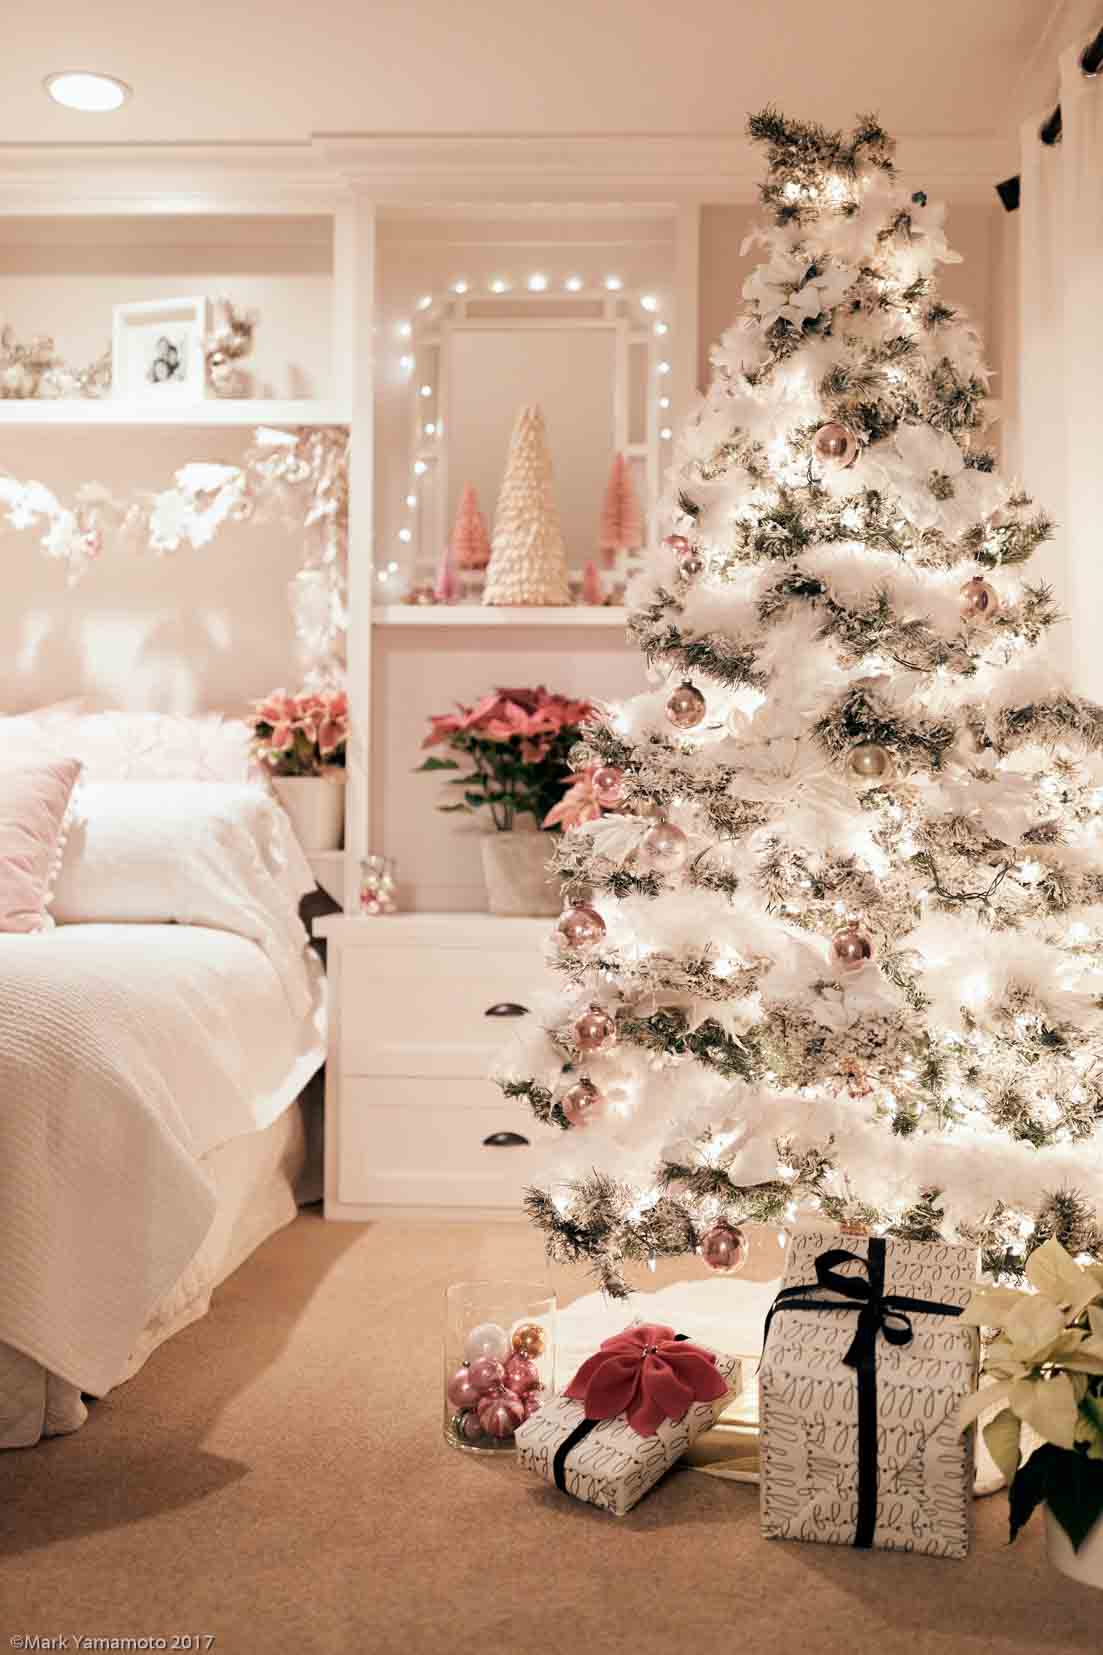 This pink Christmas decor is a winter wonderland. Pink poinsettias, bottle brush trees, and vintage pink ornaments are all the decor used in this holiday bedroom. It is festive, pretty, and feminine and perfect for the long winter nights. #christmas #holidaydecor #decorating